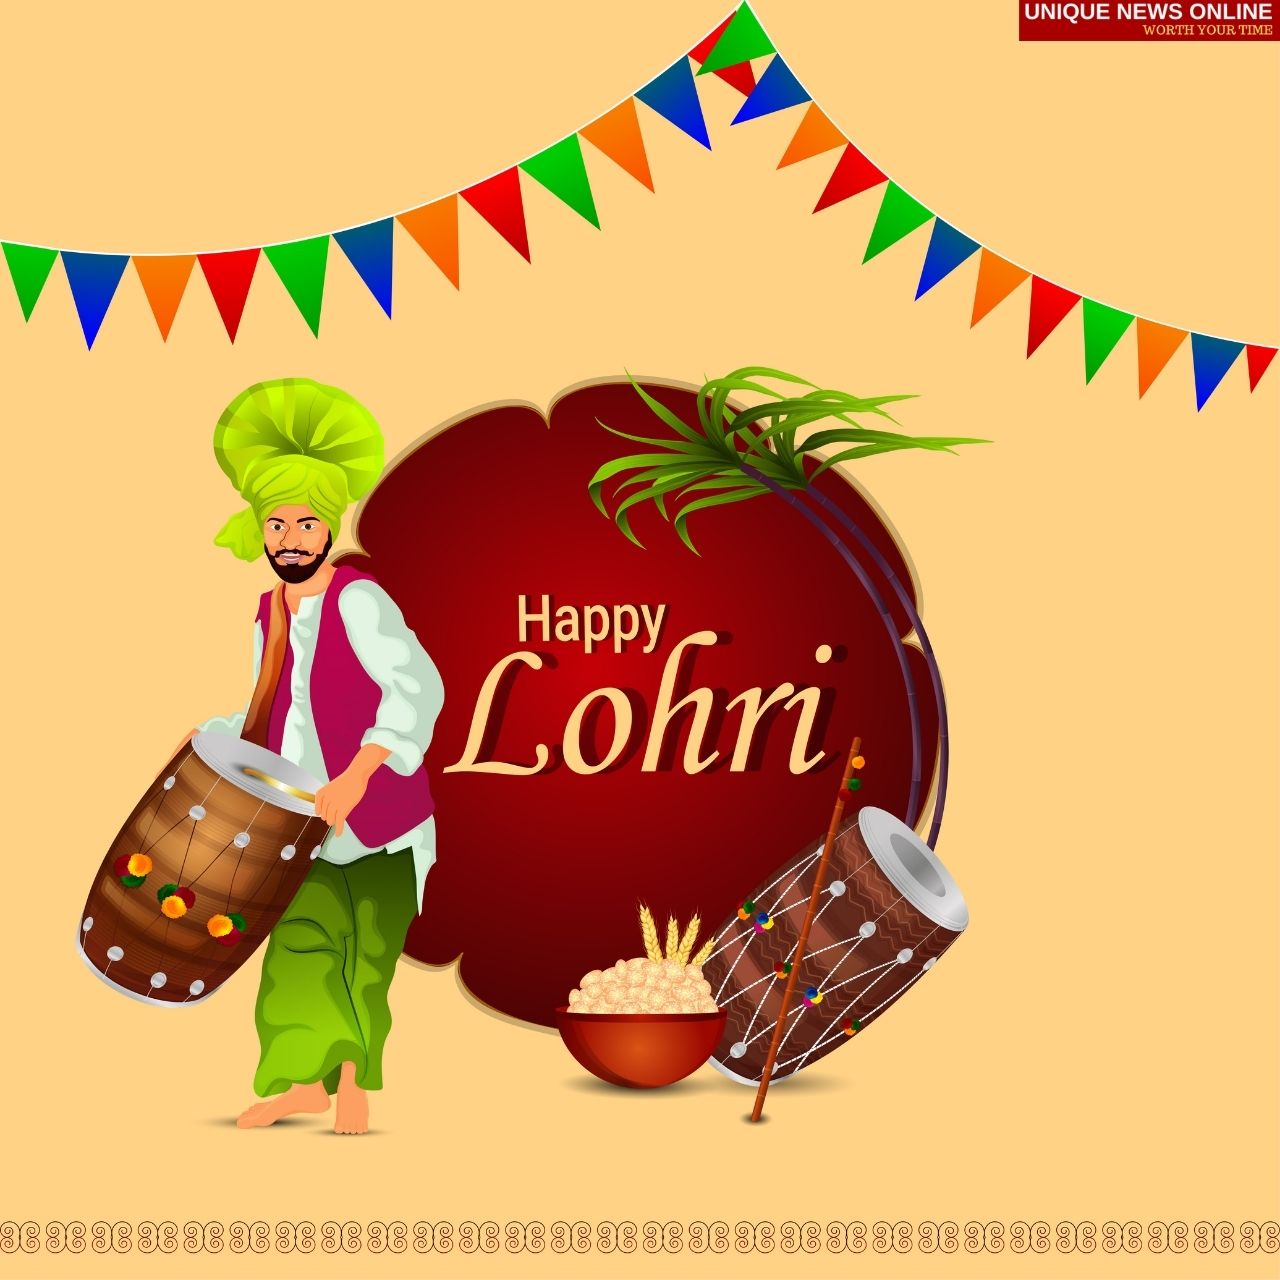 Lohri 2022 Quotes, Wishes, Messages, HD Images, Greetings for Husband/Wife